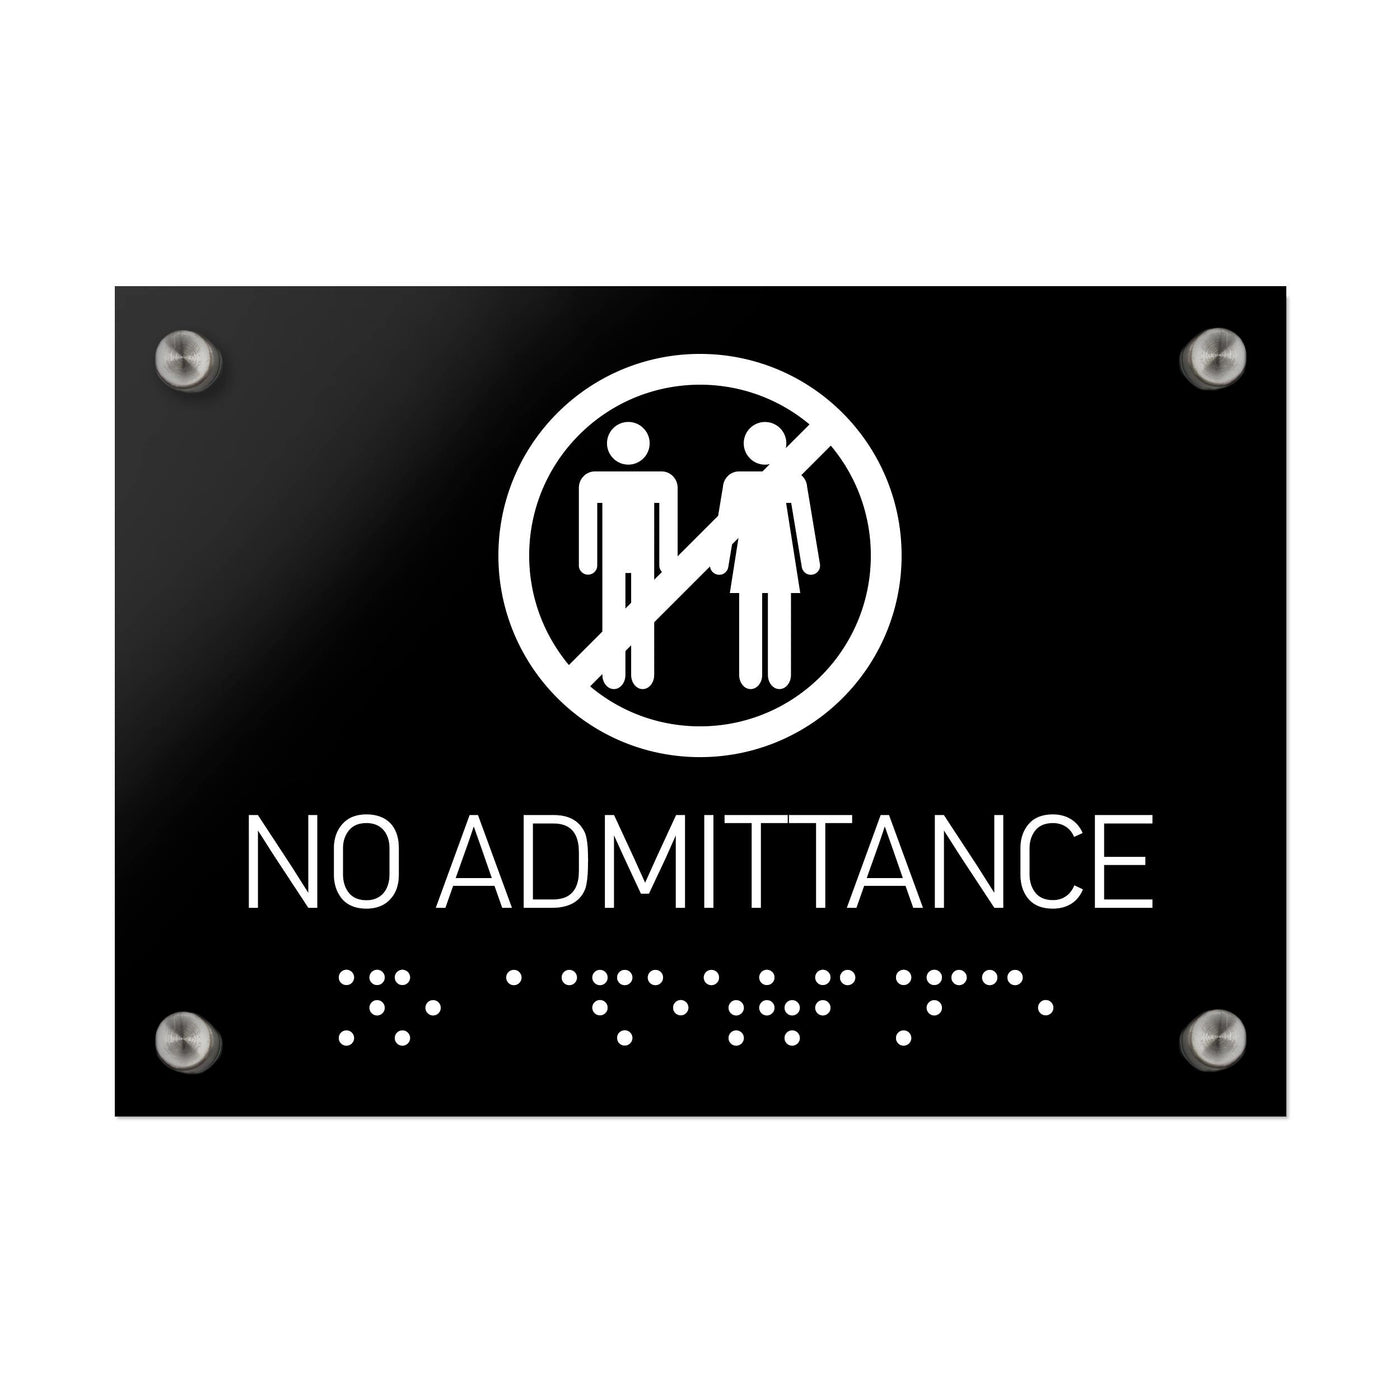 Information Signs - No Admittance Sign Braille - Black Acrylic